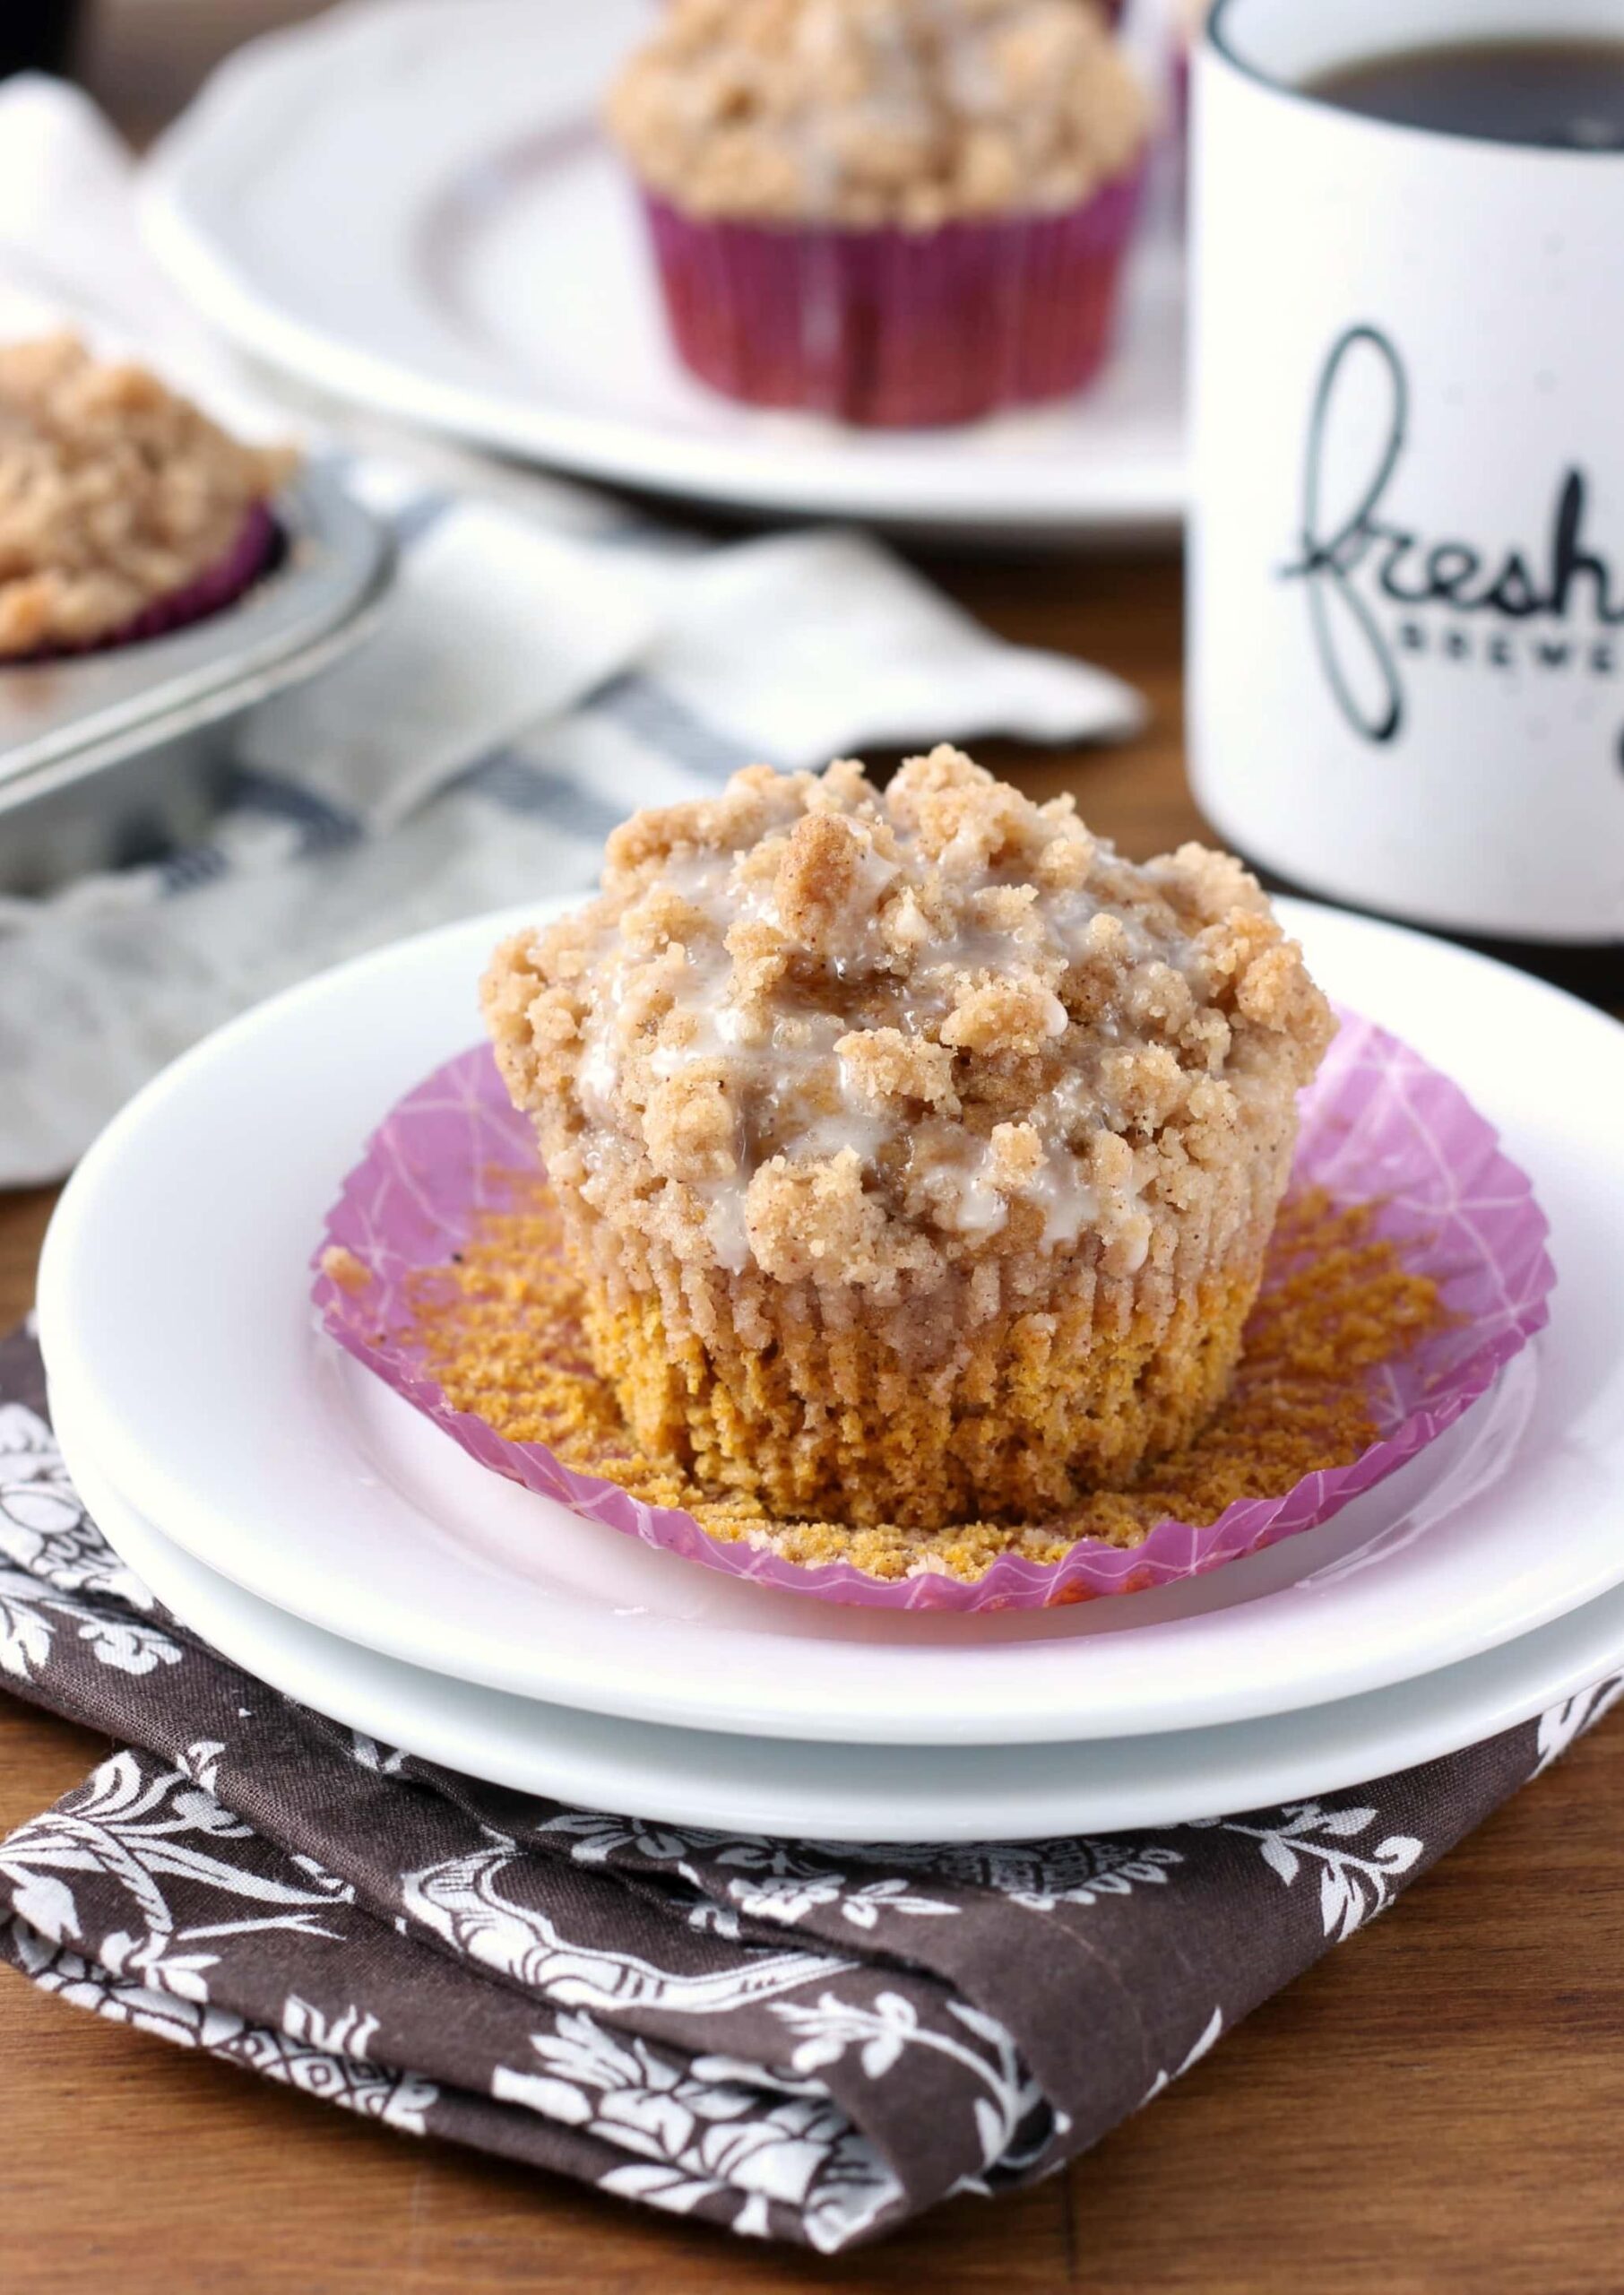  These muffins are the perfect blend between a classic coffee cake and a pumpkin spice latte.